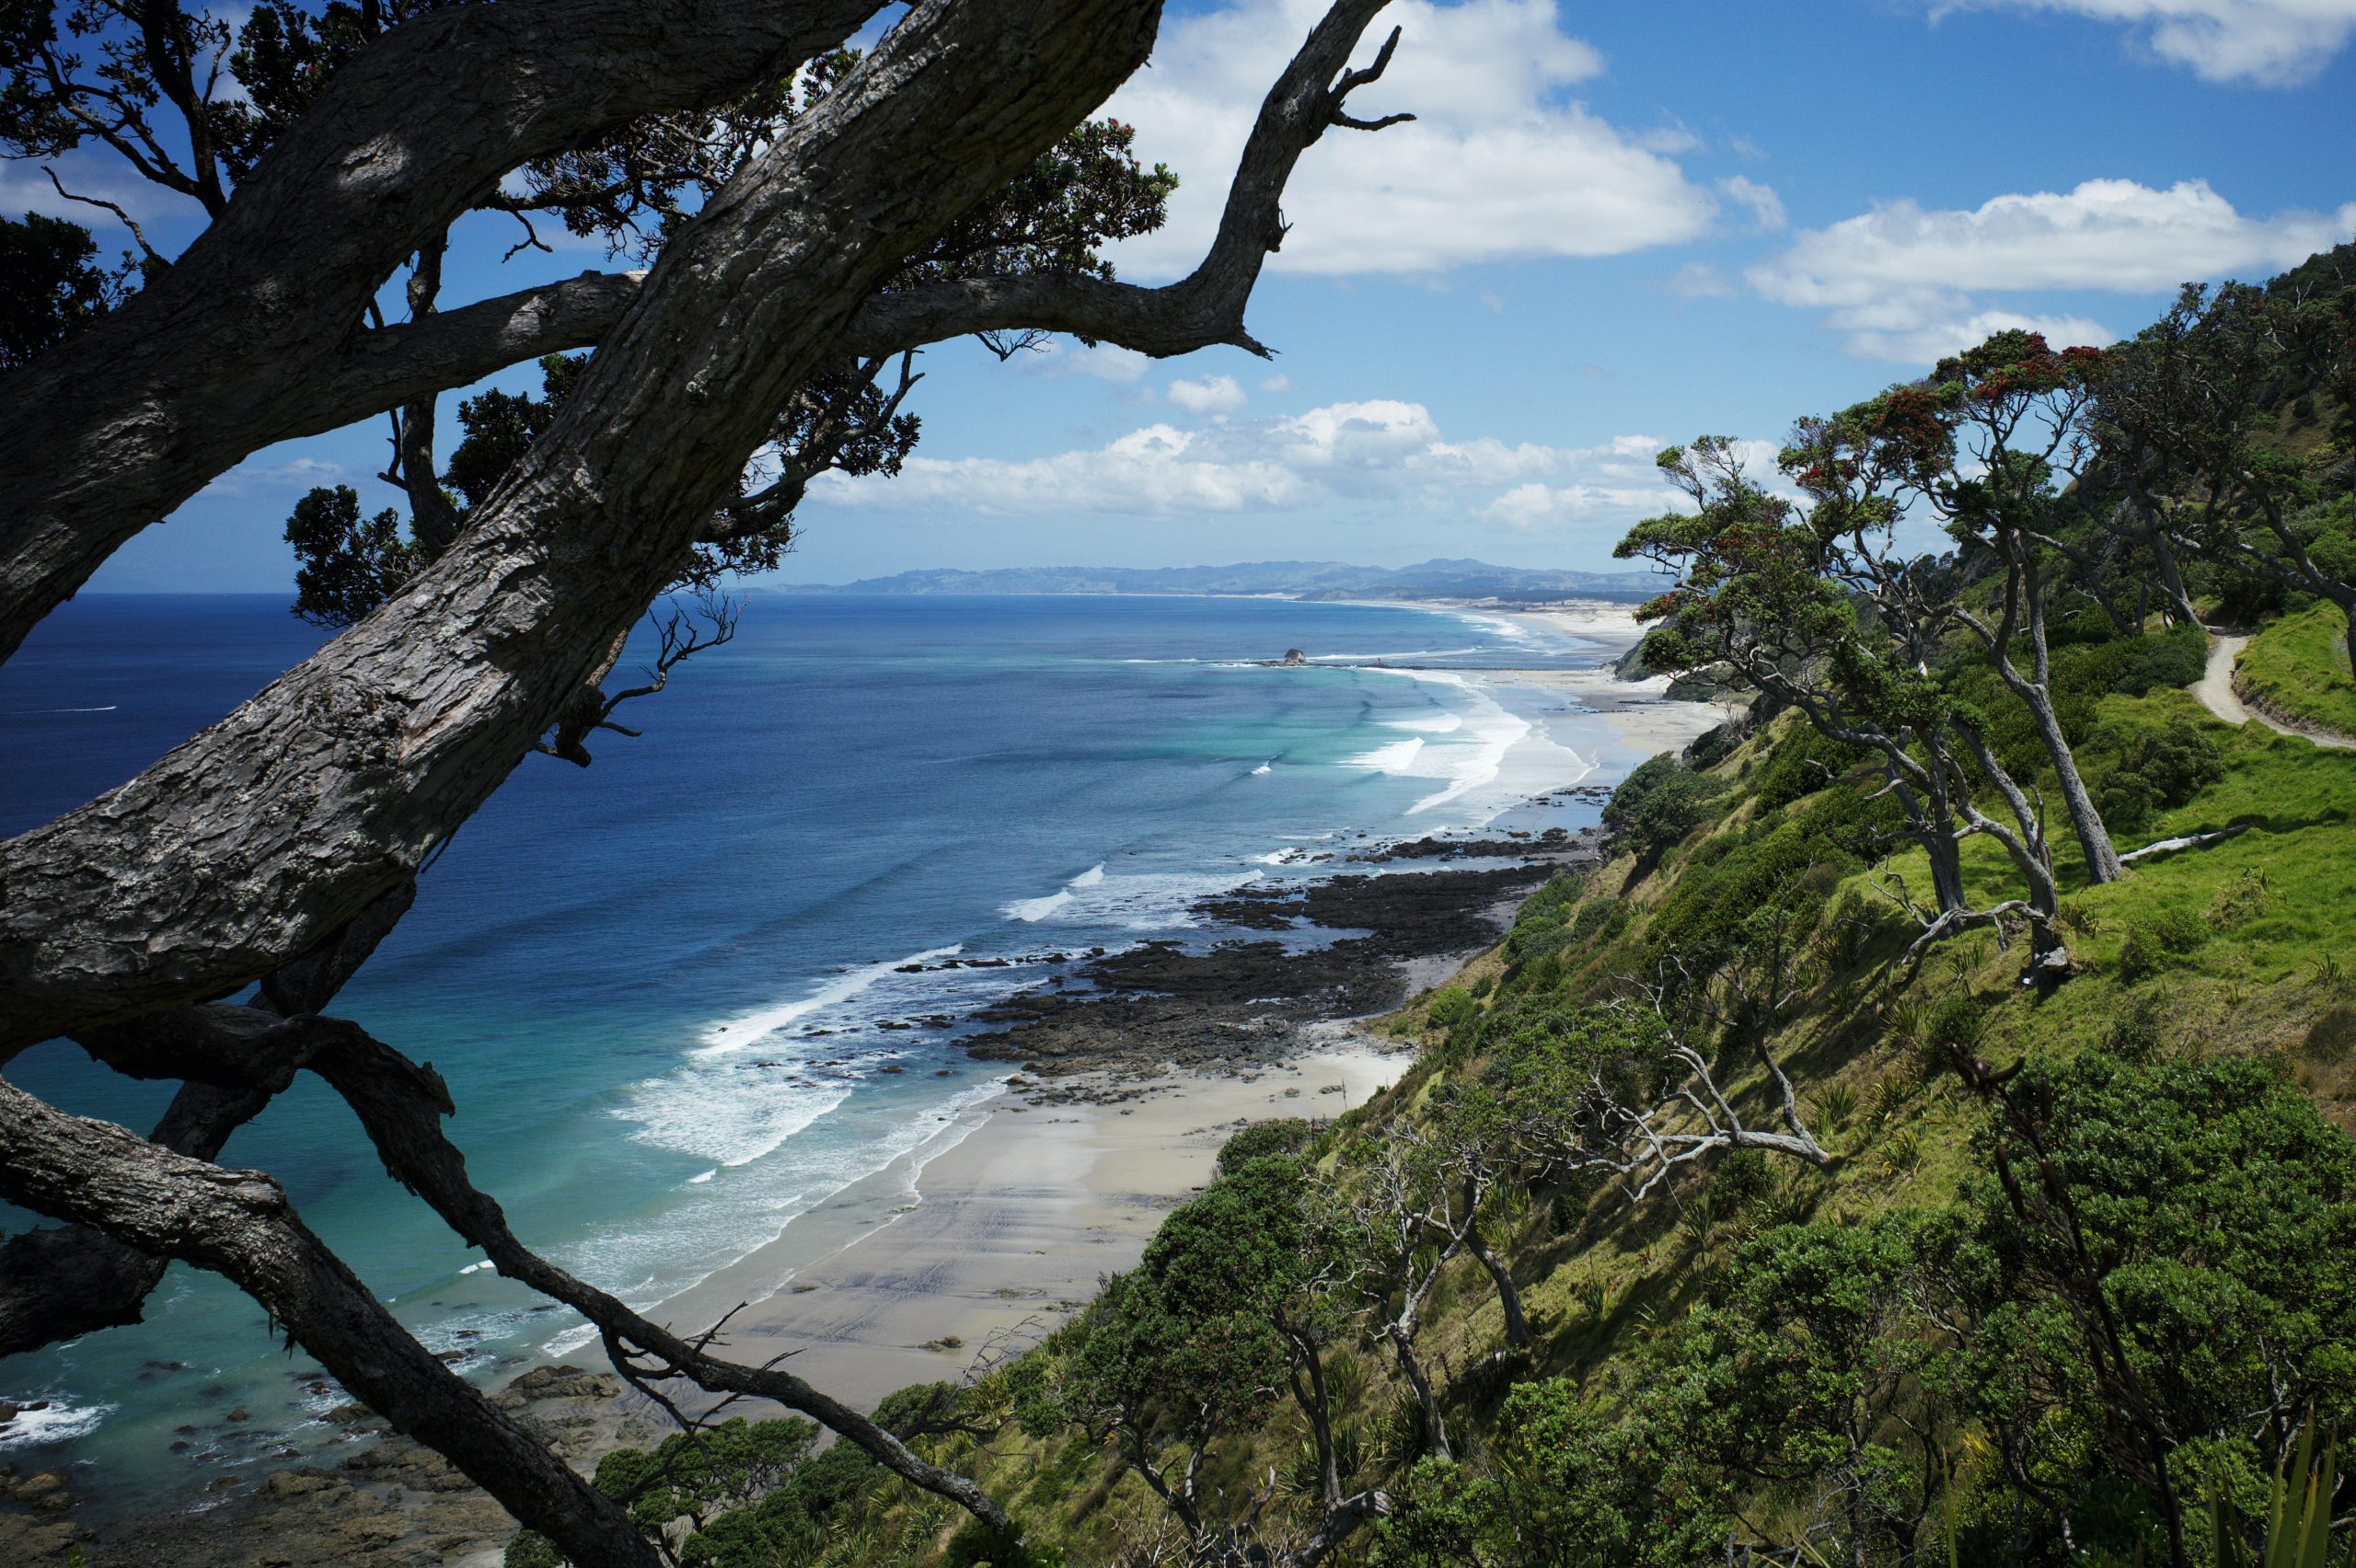 The view of a beach with gentle waves from the top of a grassy cliff with leaning trees.